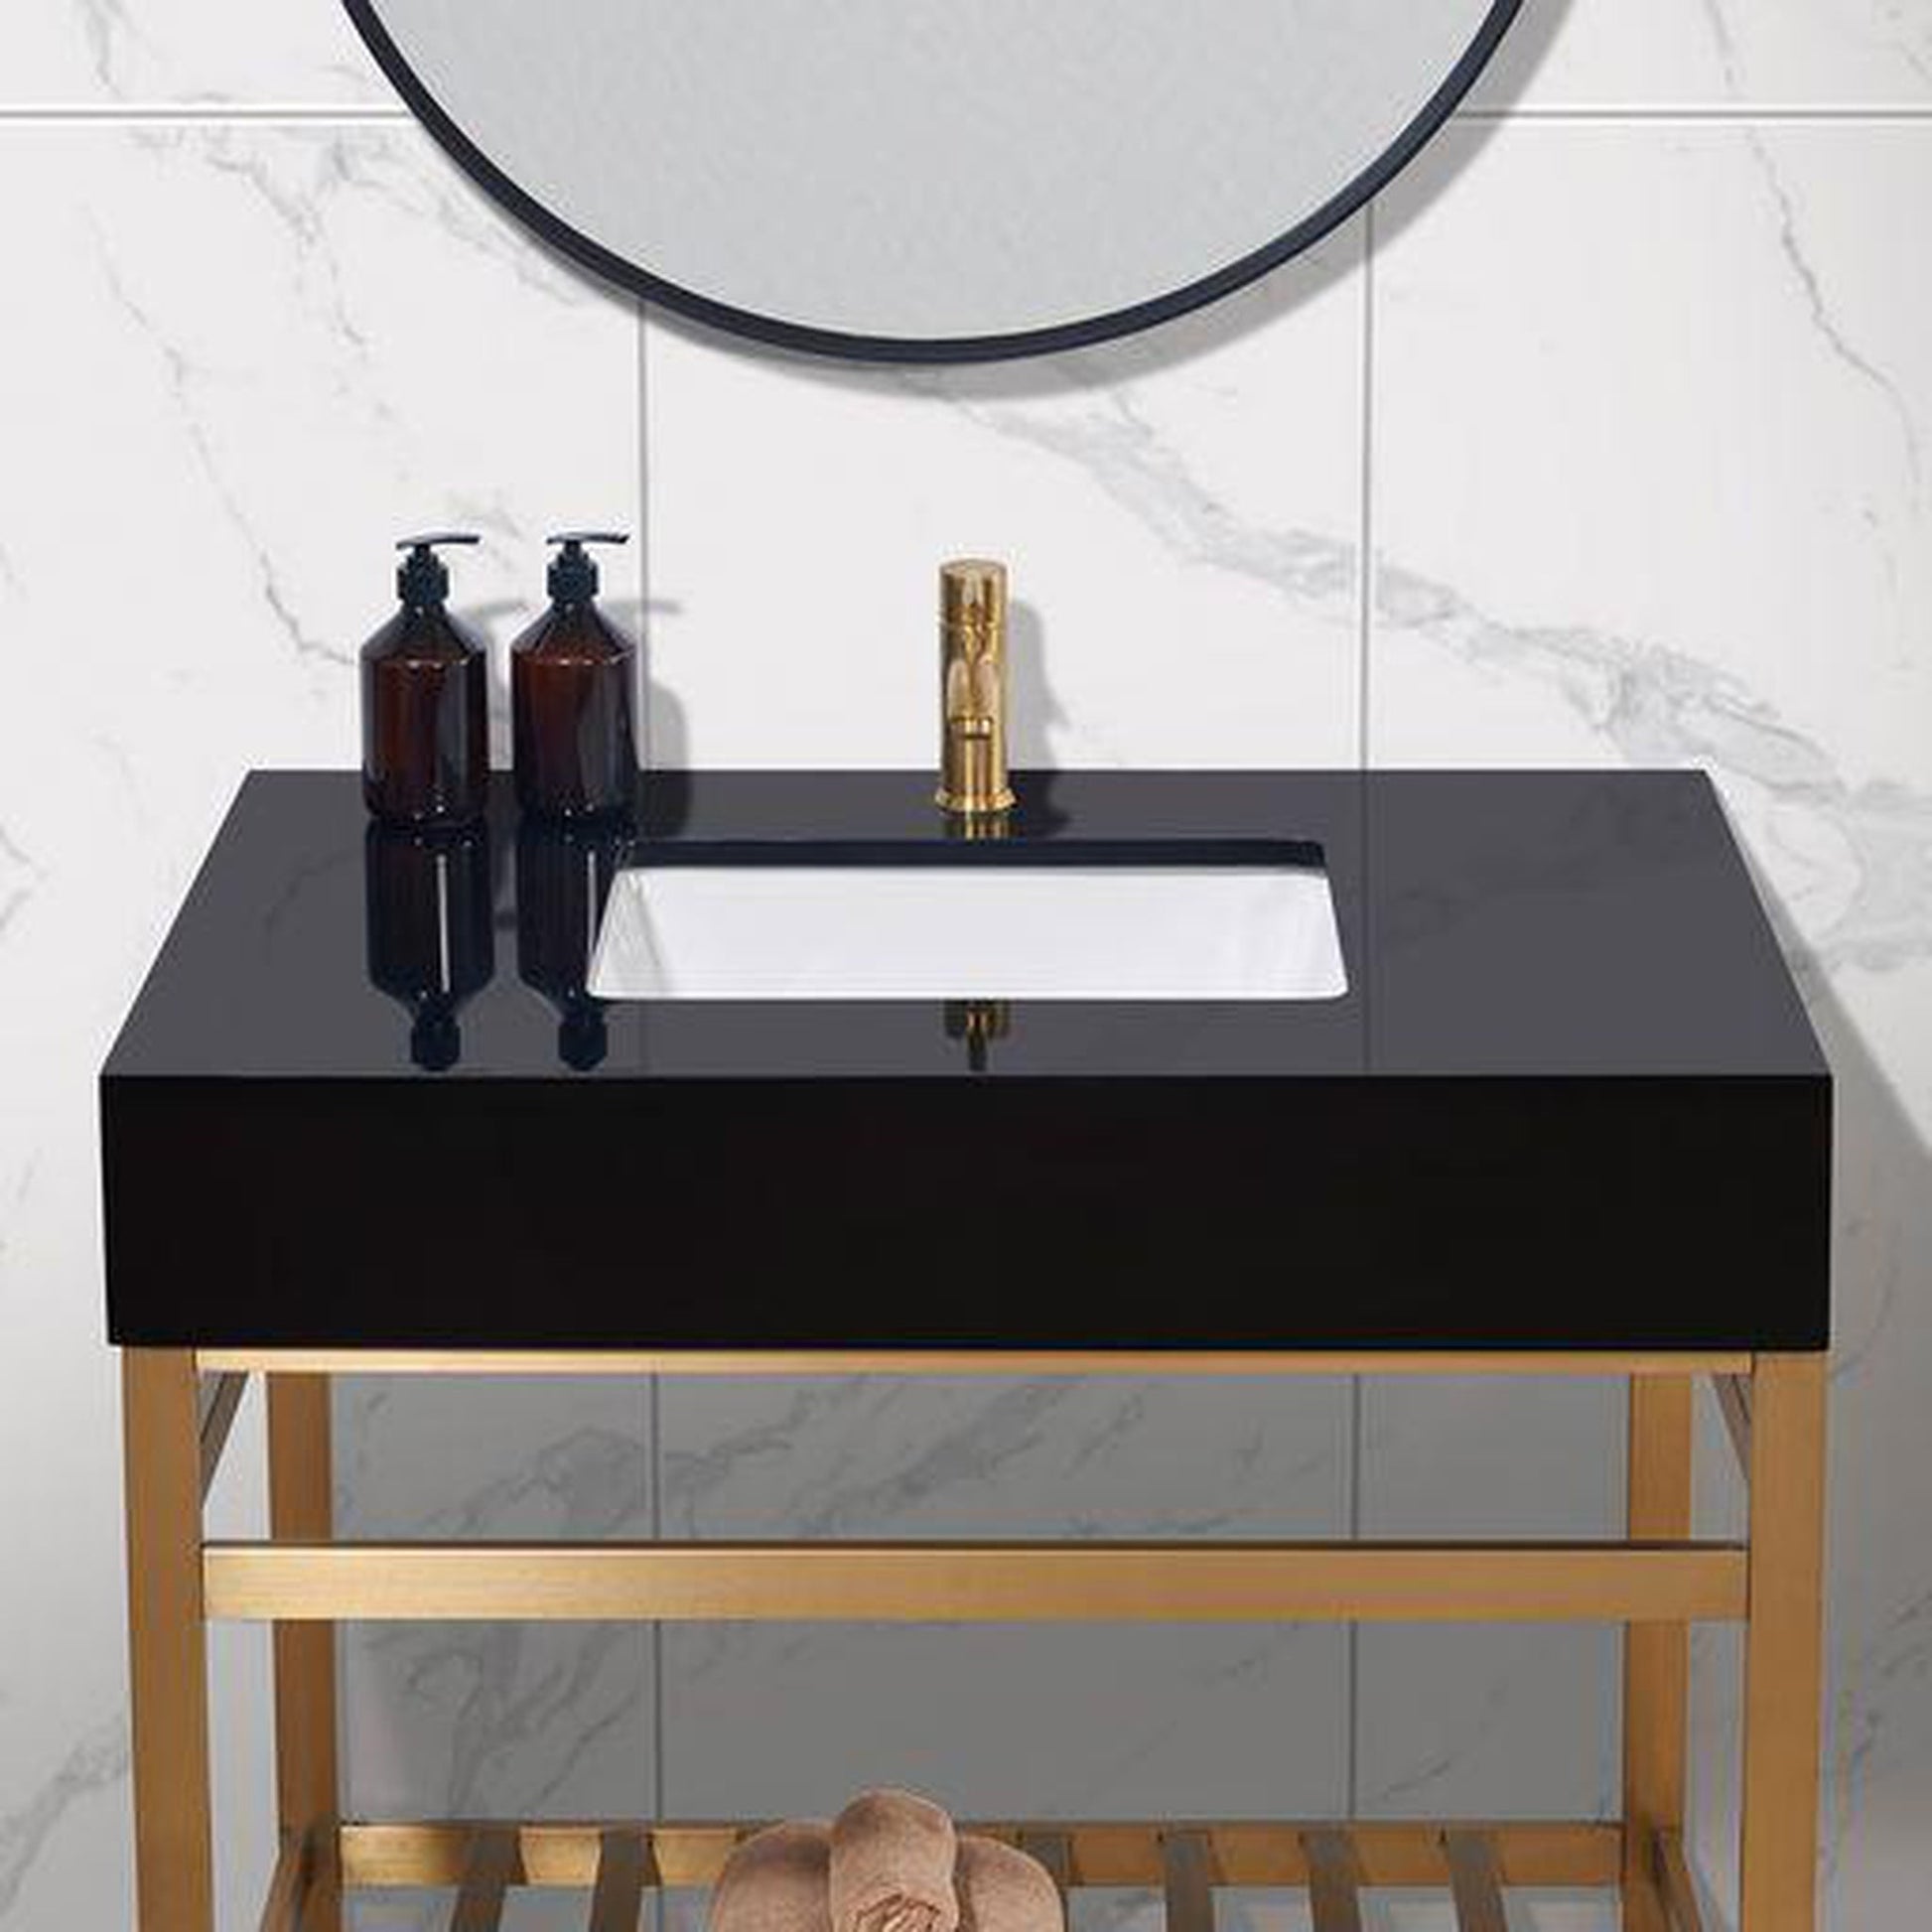 Altair Nauders 36" x 22" Imperial Black Apron Composite Stone Bathroom Vanity Top With White Sink